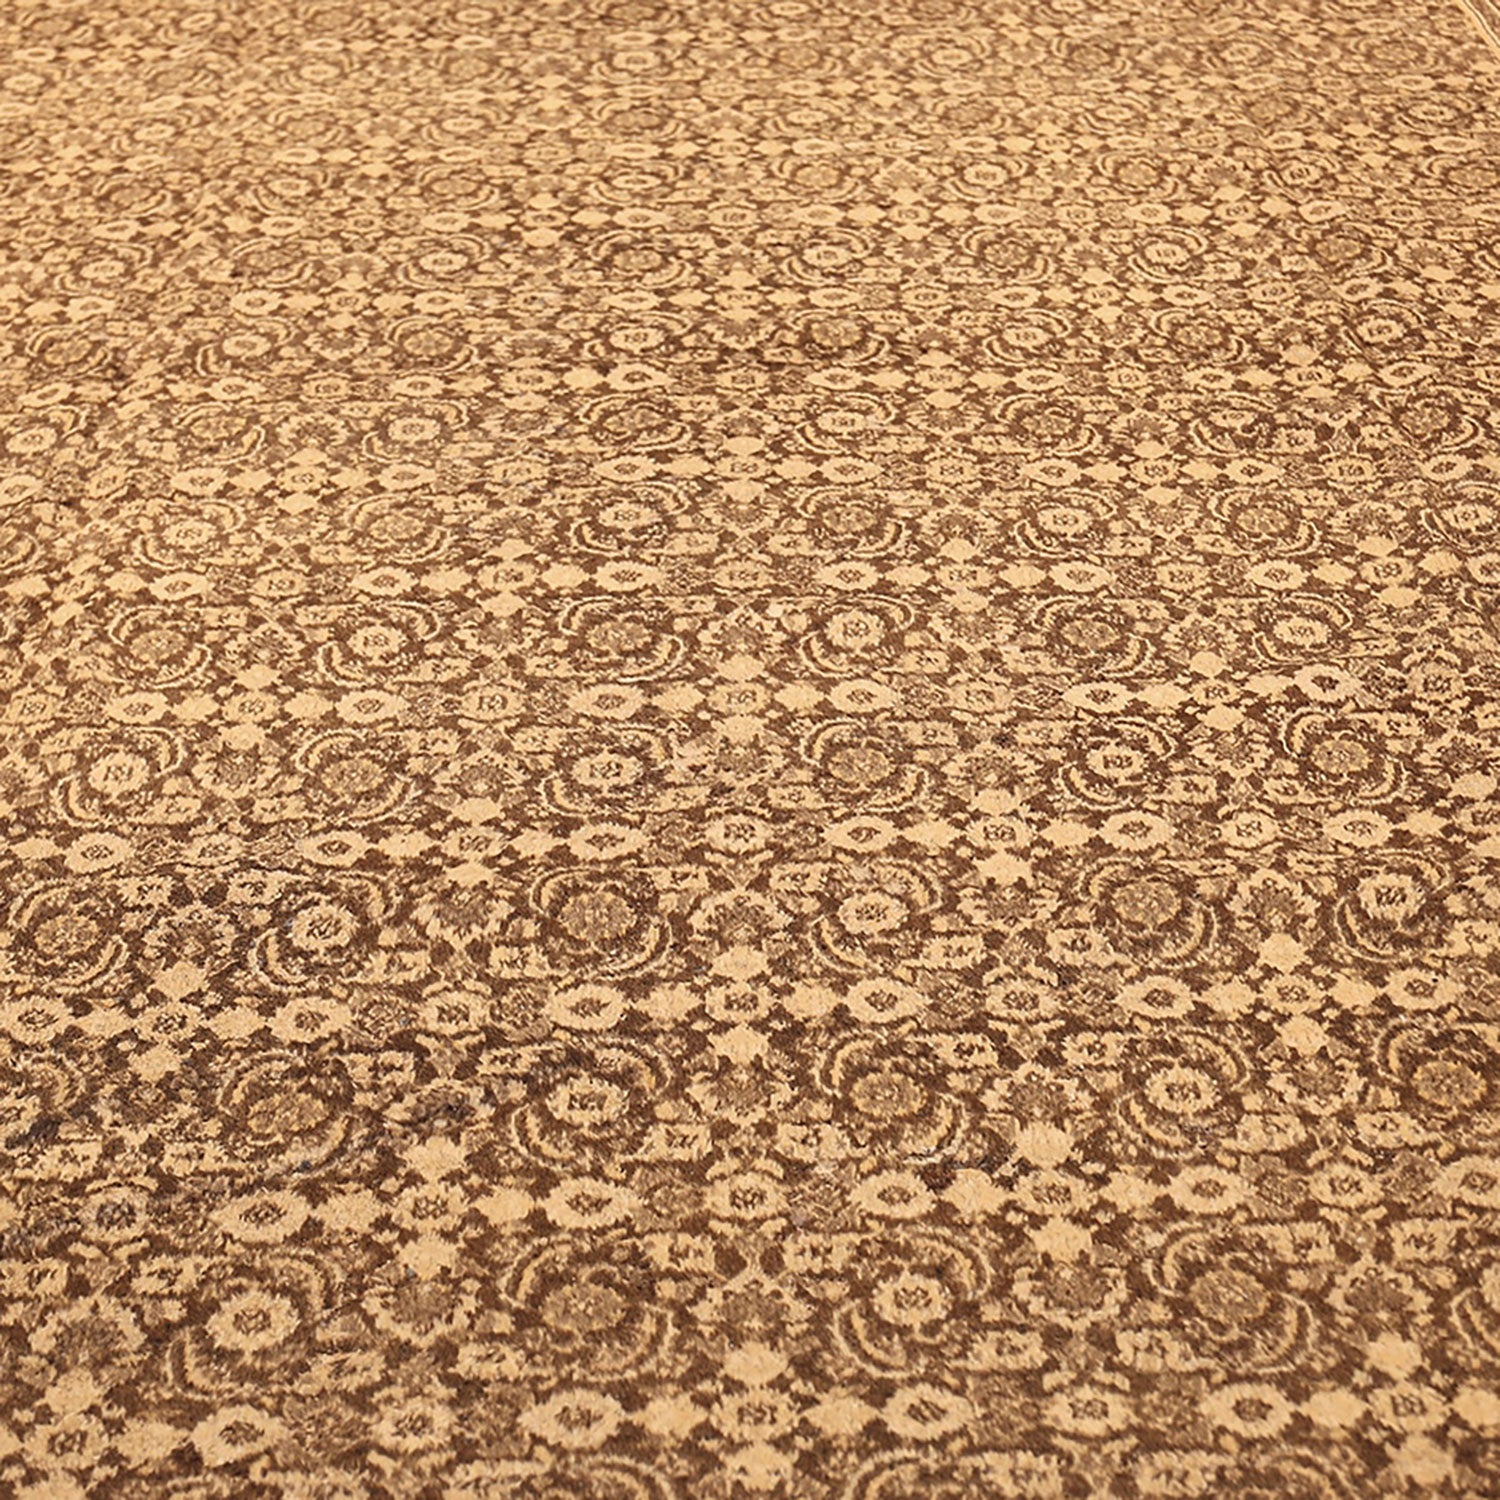 Intricate and symmetrical brown carpet with floral medallion-like designs.